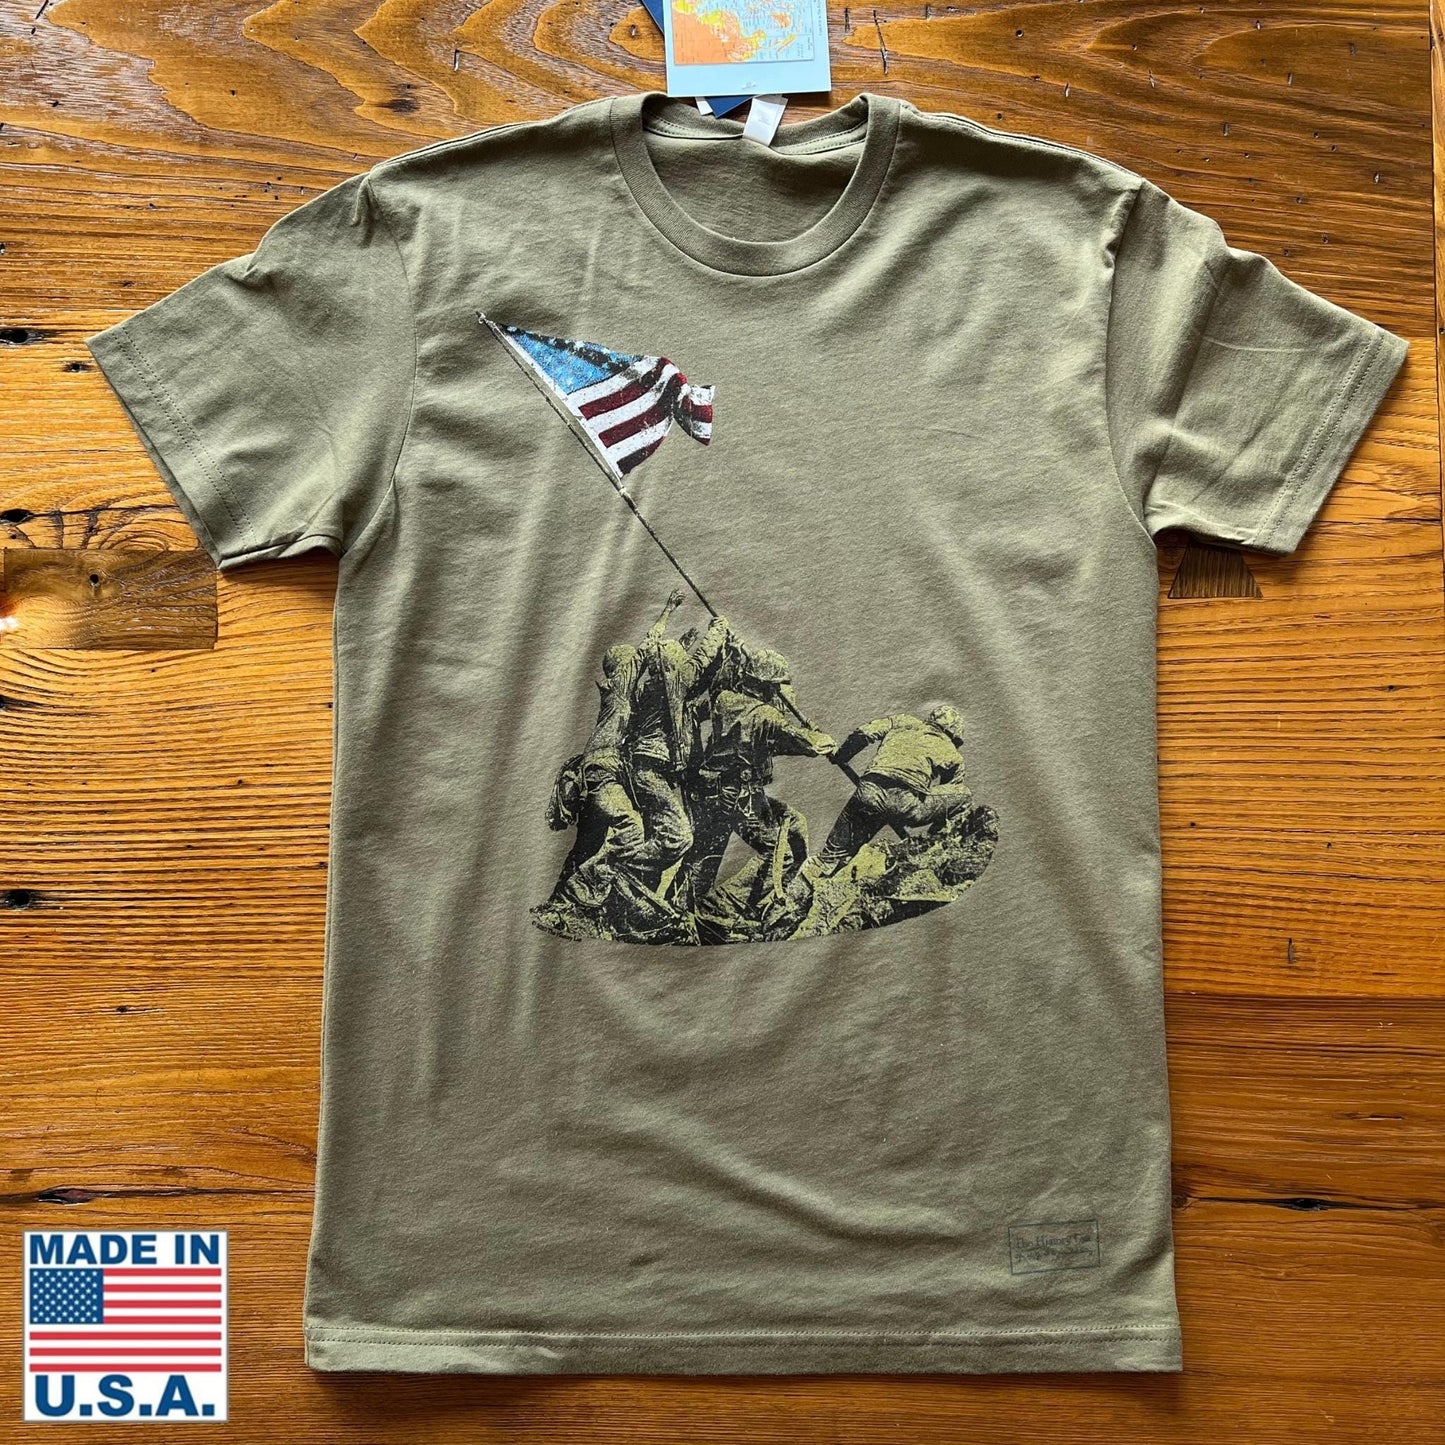 Military Green - Flag raising on Mount Suribachi - 75th Anniversary of the Battle of Iwo Jima from the History List store